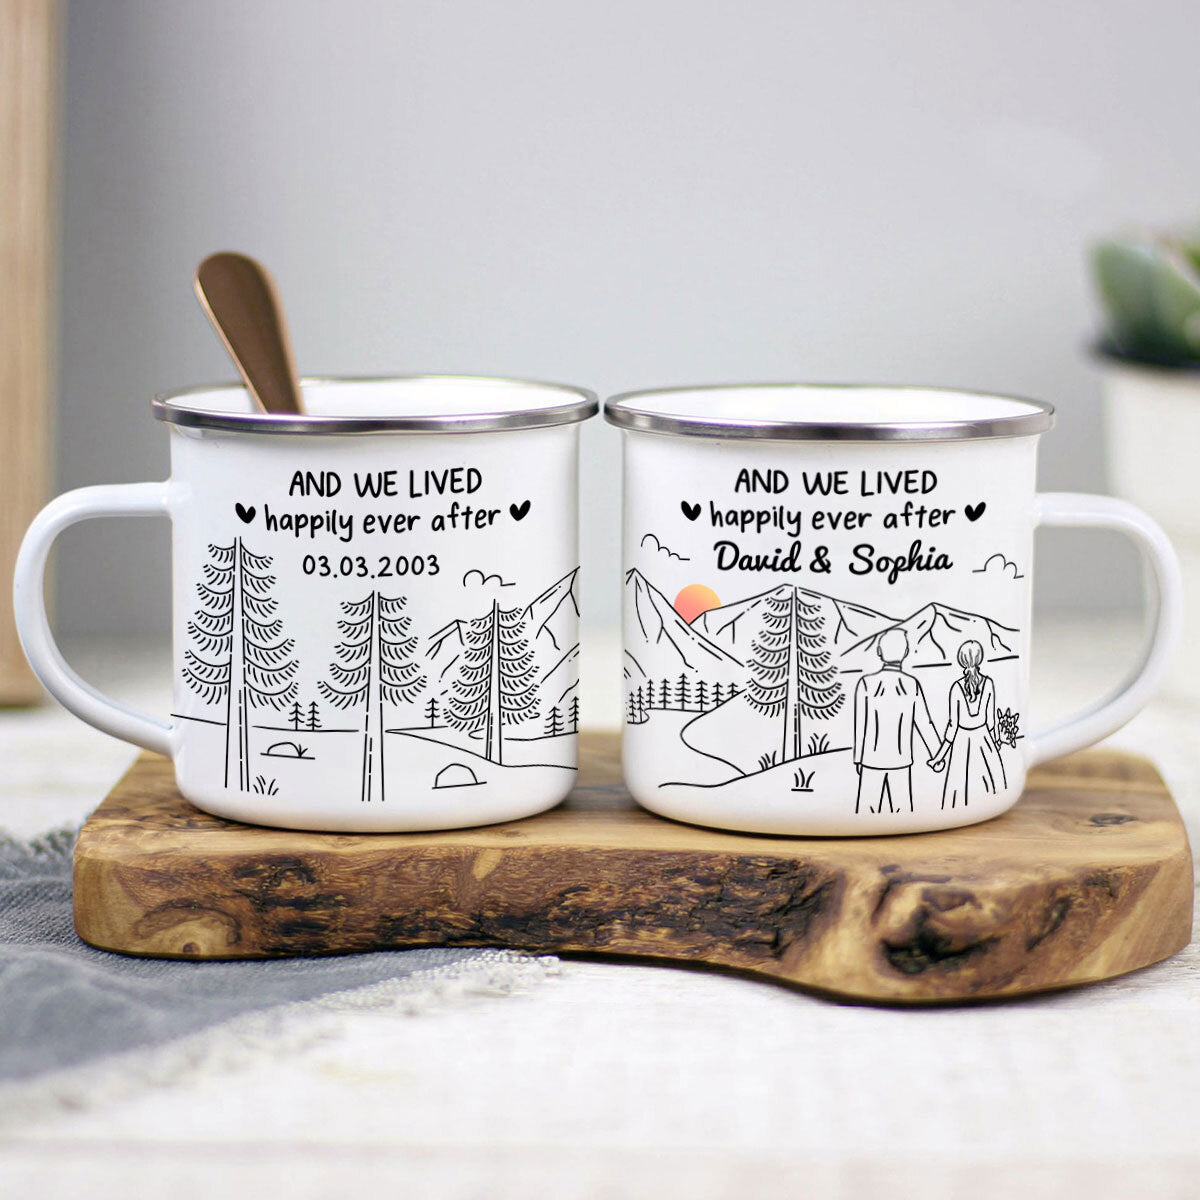 And So The Adventure Begins - Personalized Enamel Mug